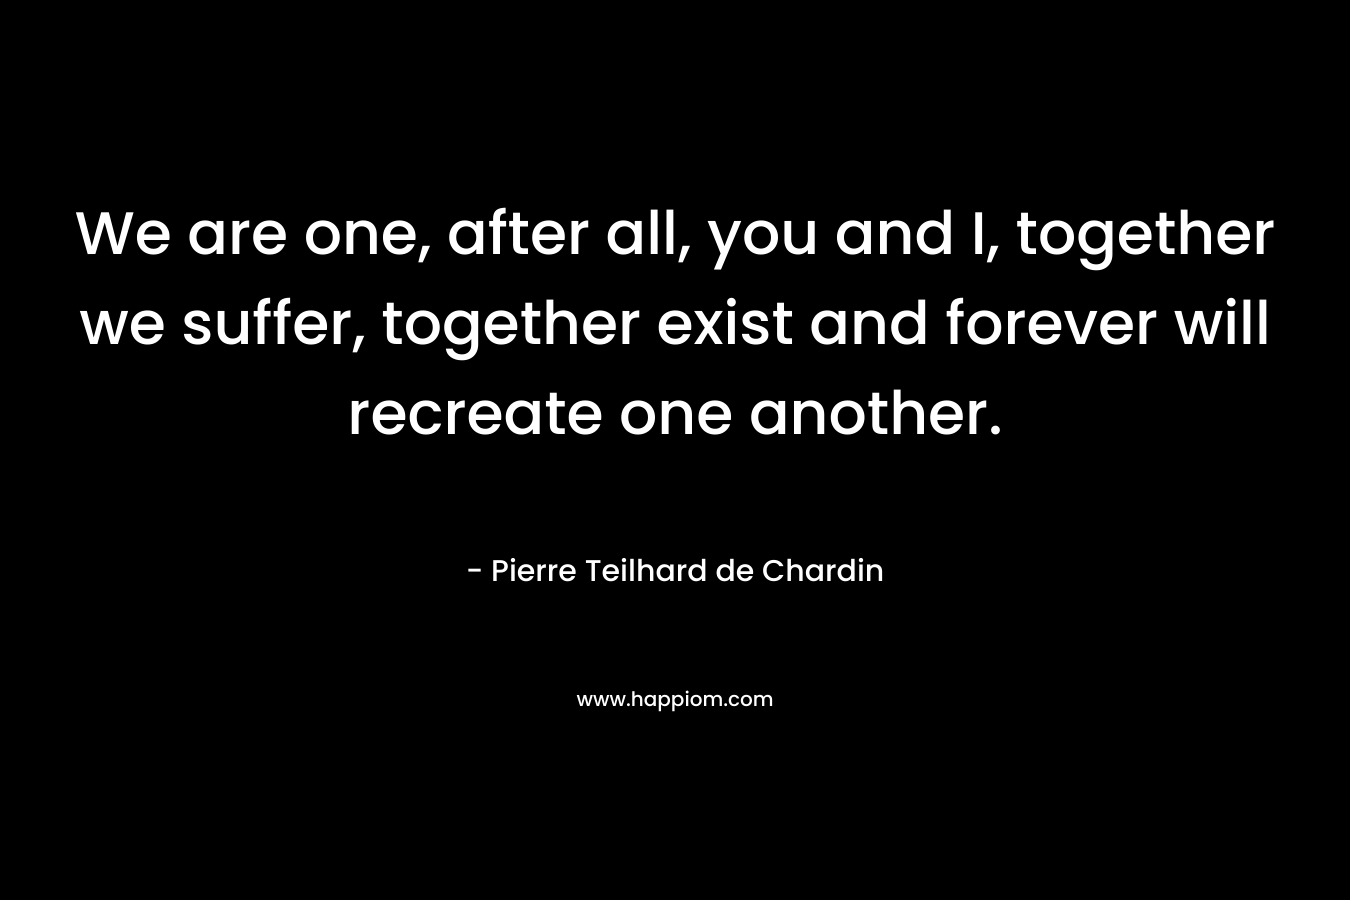 We are one, after all, you and I, together we suffer, together exist and forever will recreate one another. – Pierre Teilhard de Chardin